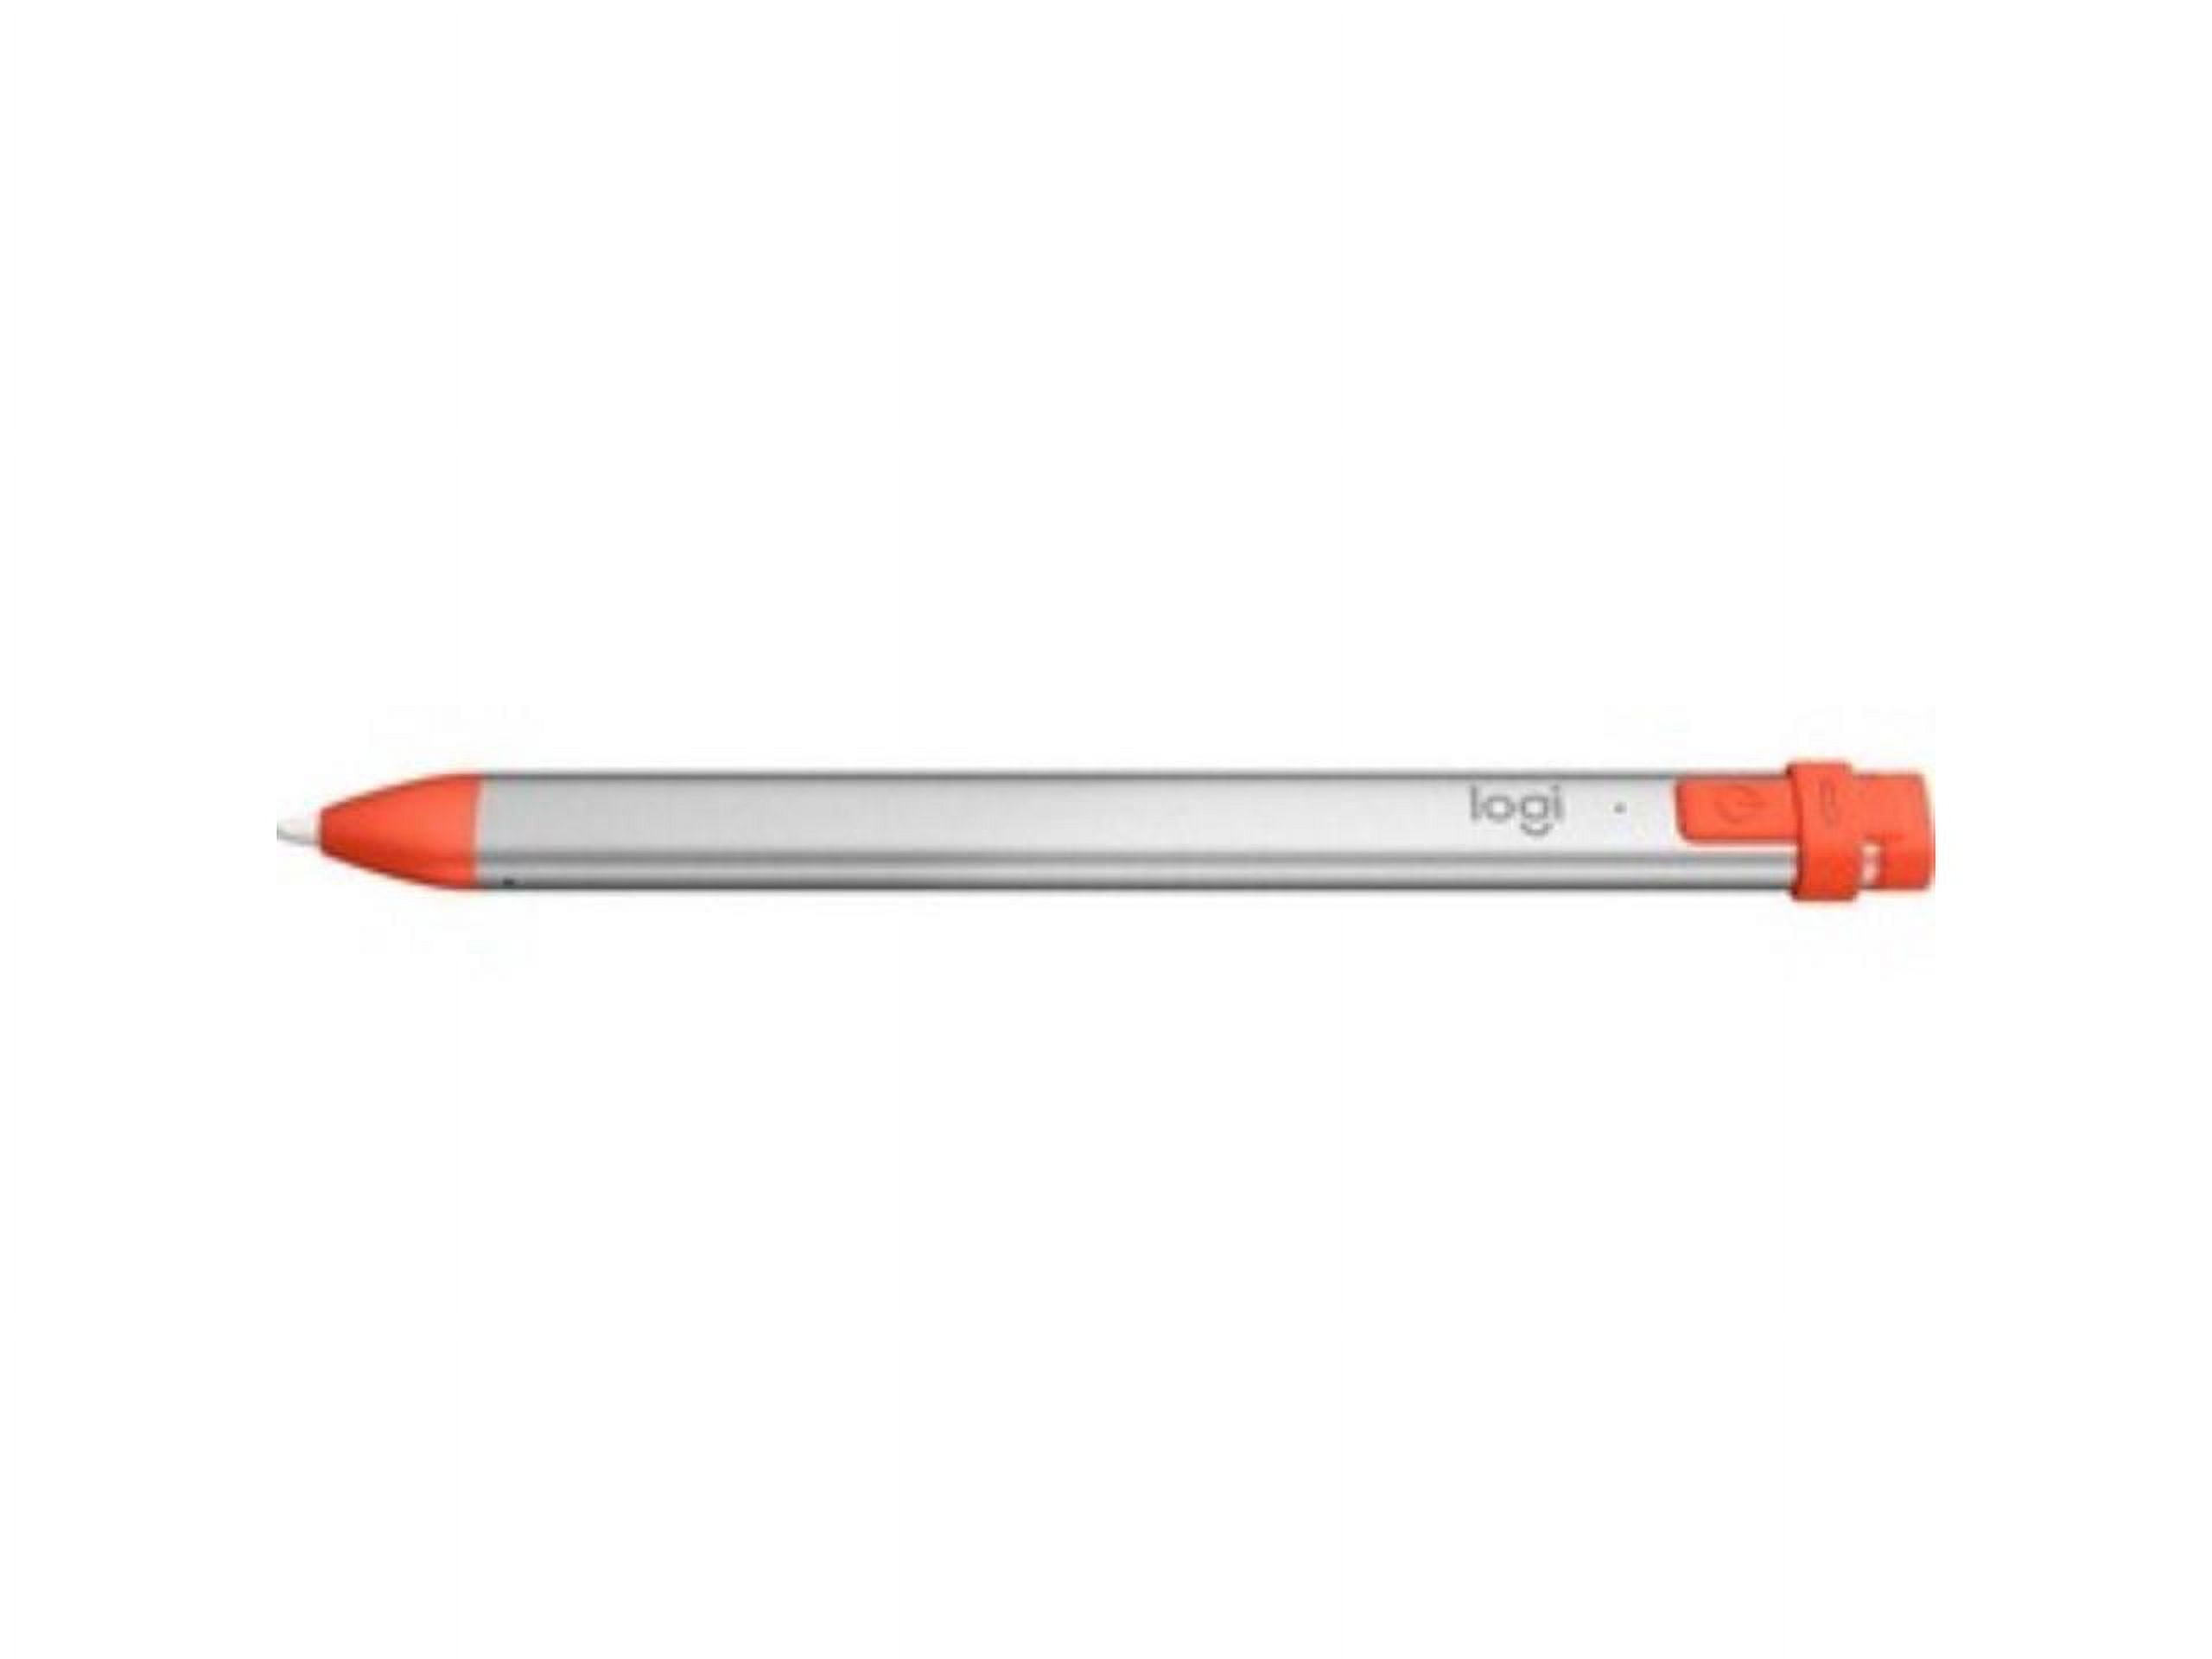 Logitech Crayon Digital Pencil for all iPads (2018 releases and later) with  Apple Pencil technology